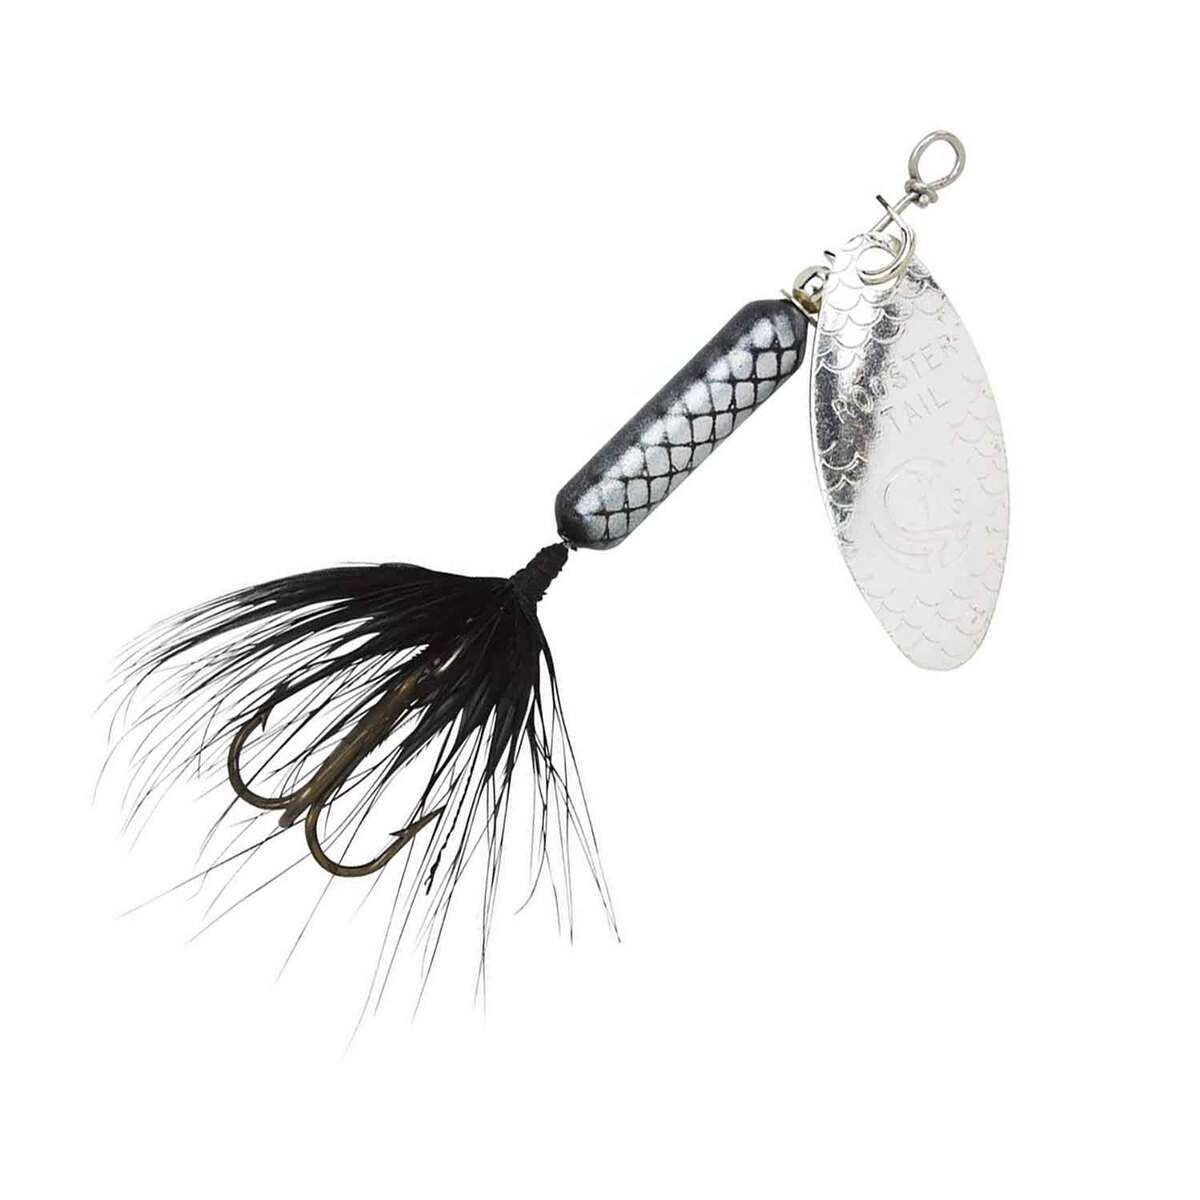 Wordens 208-BL Original RoosterTail Spinner Lure, 2 1/4-Inch, 1/8-ounce